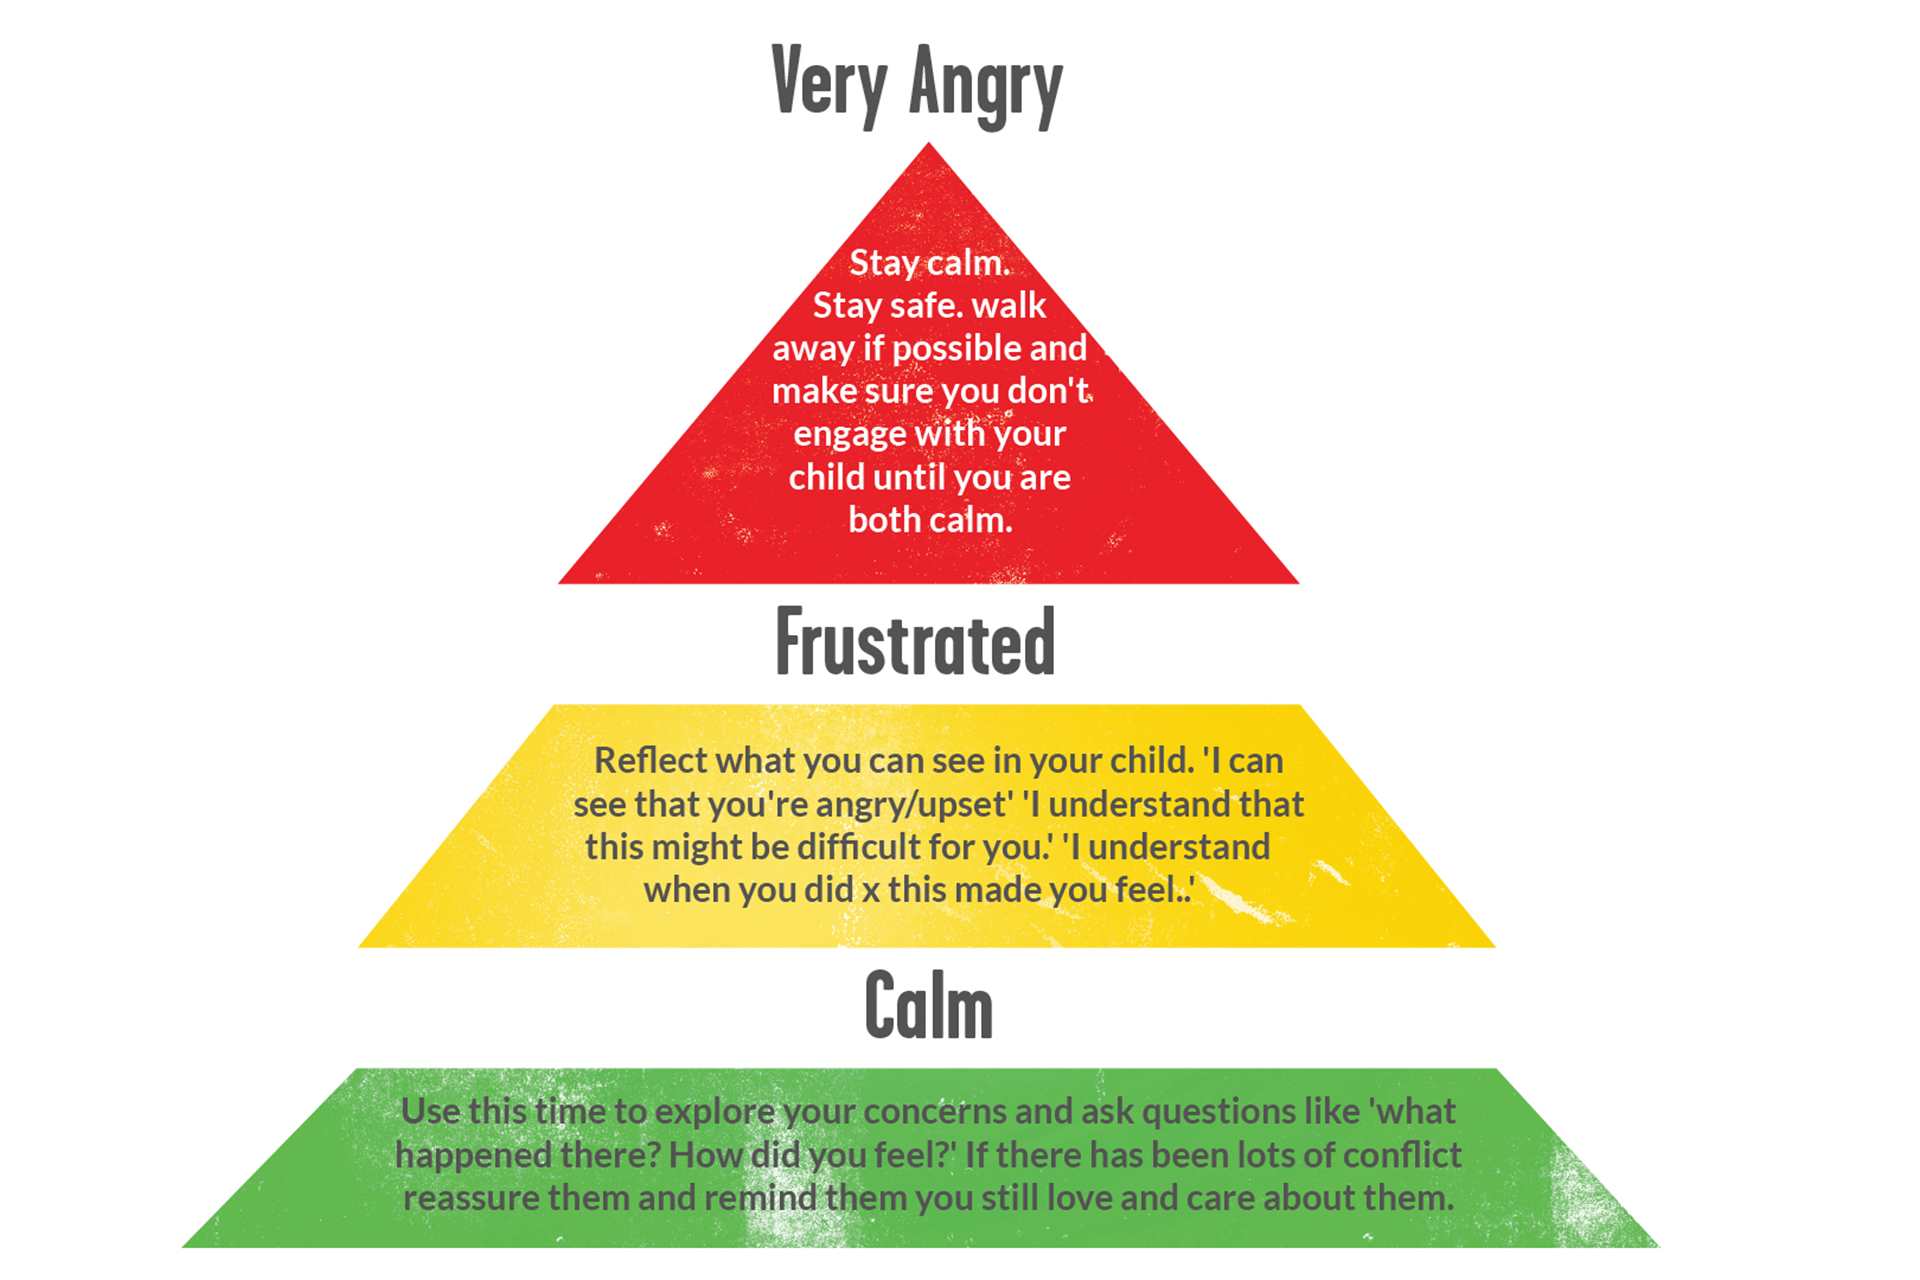 An image of our 'When Emotions Explode' poster. It shows a pyramid divided into 3 sections with the sub headings 'Very Angry', Frustrated', and 'Calm'.